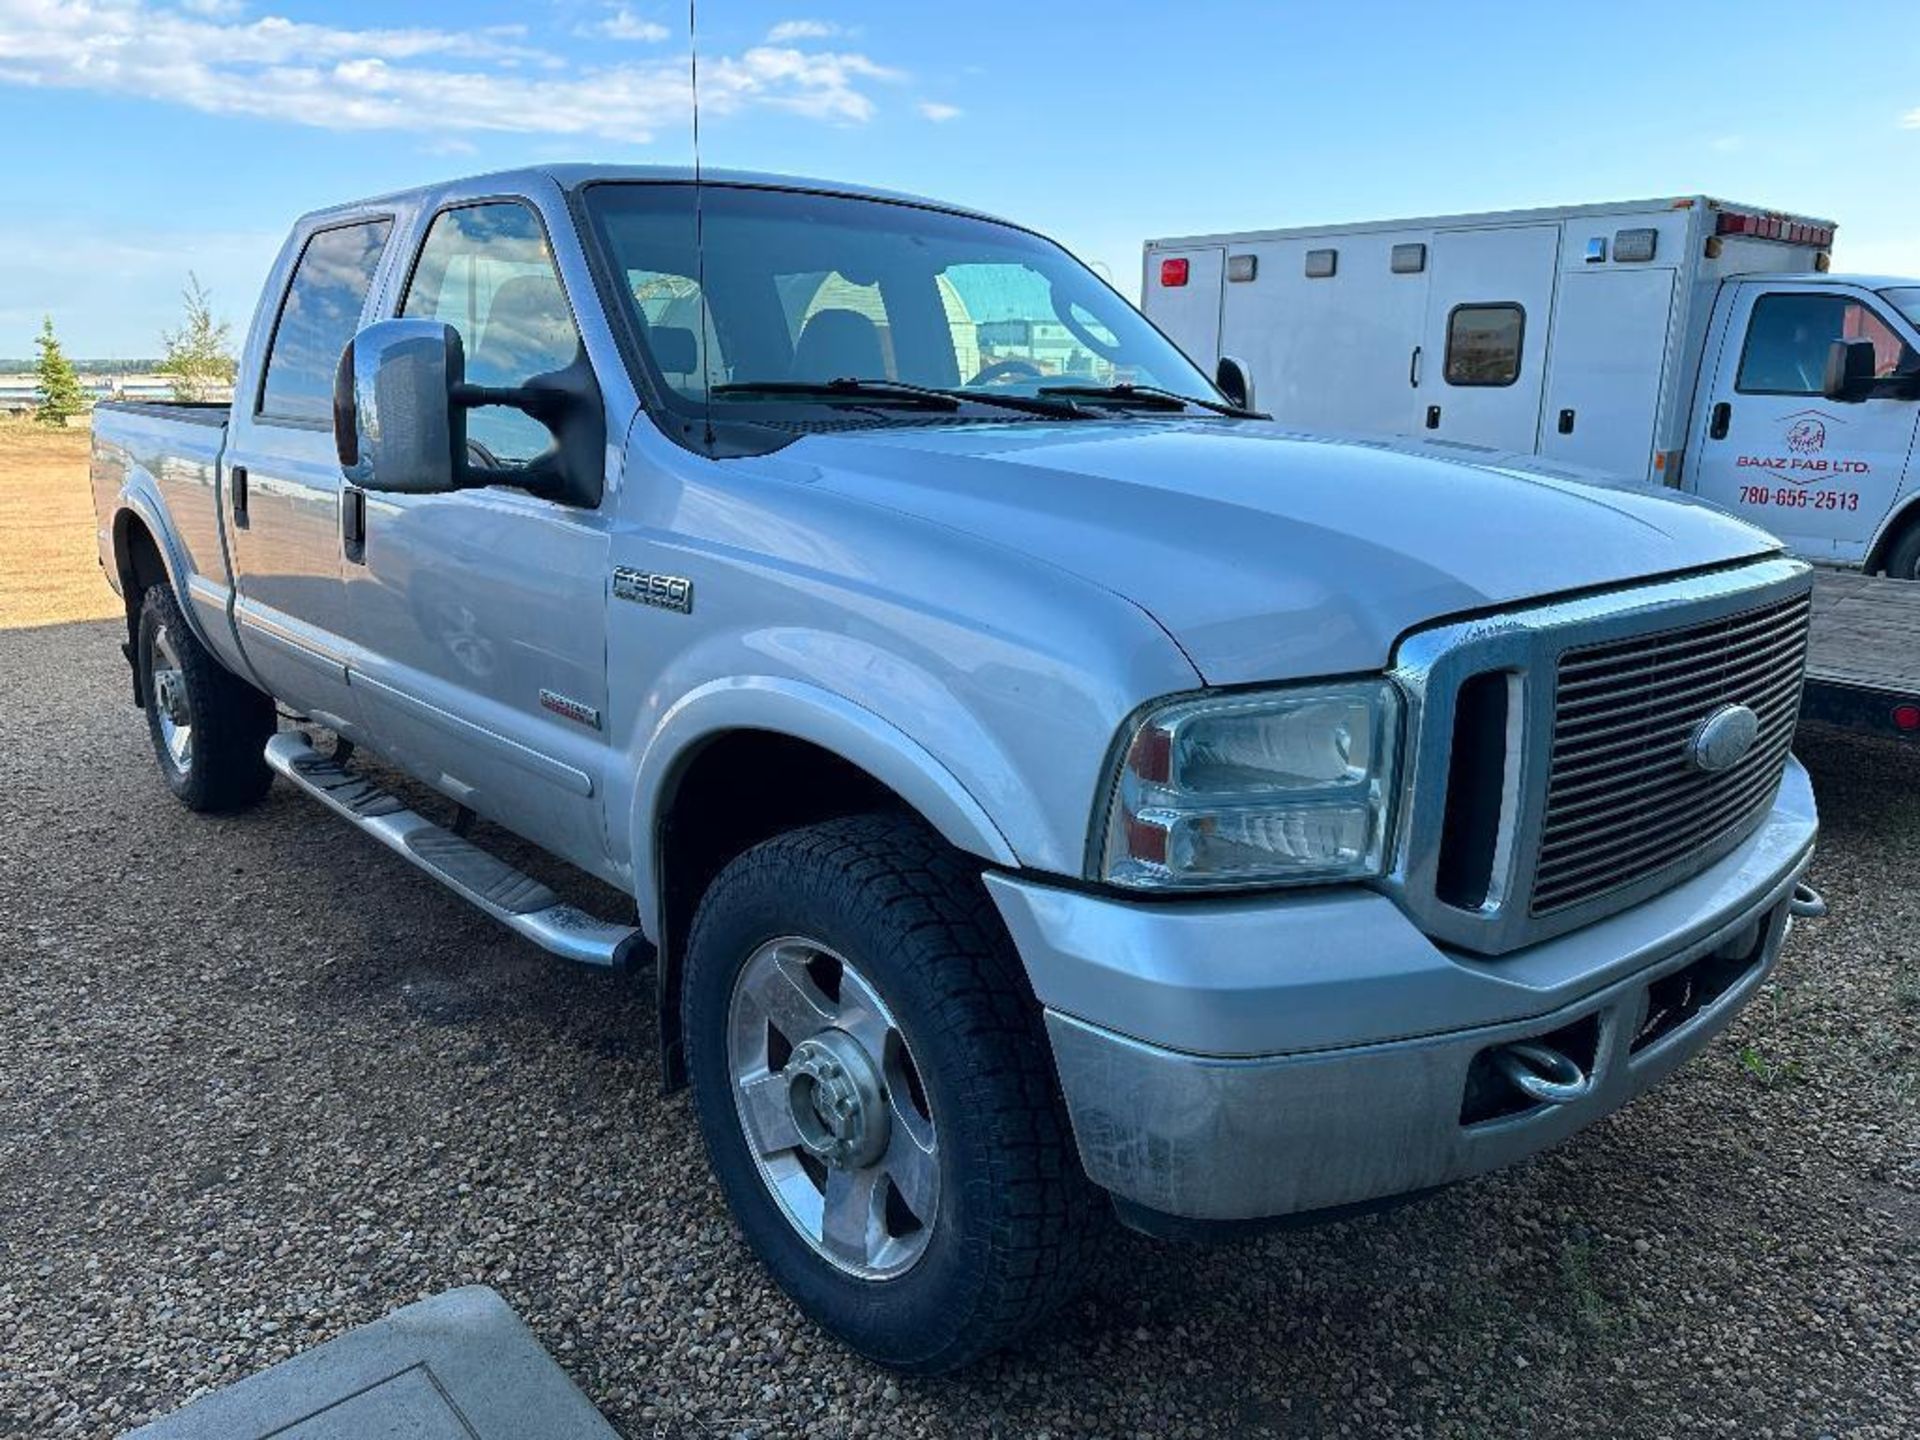 2007 Ford F-350 Crew Cab 4X4 Diesel, 257,842km Showing VIN #: 1FTWW31P27EA55133 - Image 2 of 12